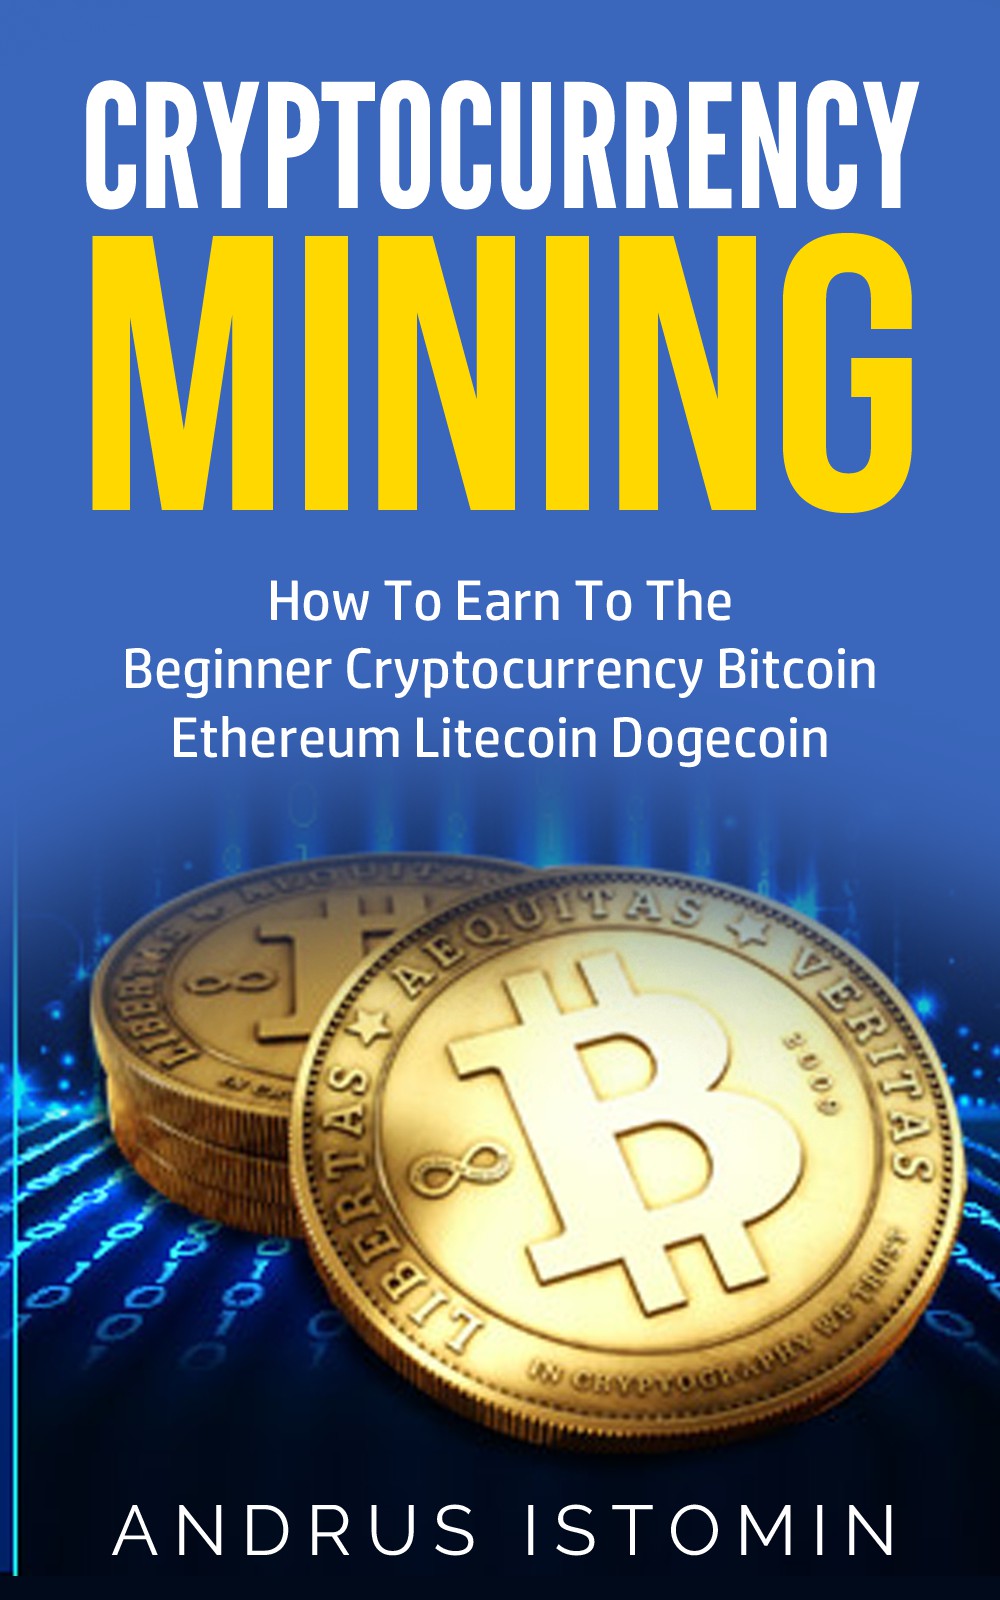 FREE: Cryptocurrency Mining : How To Earn To The Beginner Cryptocurrency Bitcoin Ethereum Litecoin Dogecoin by Andrus Istomin